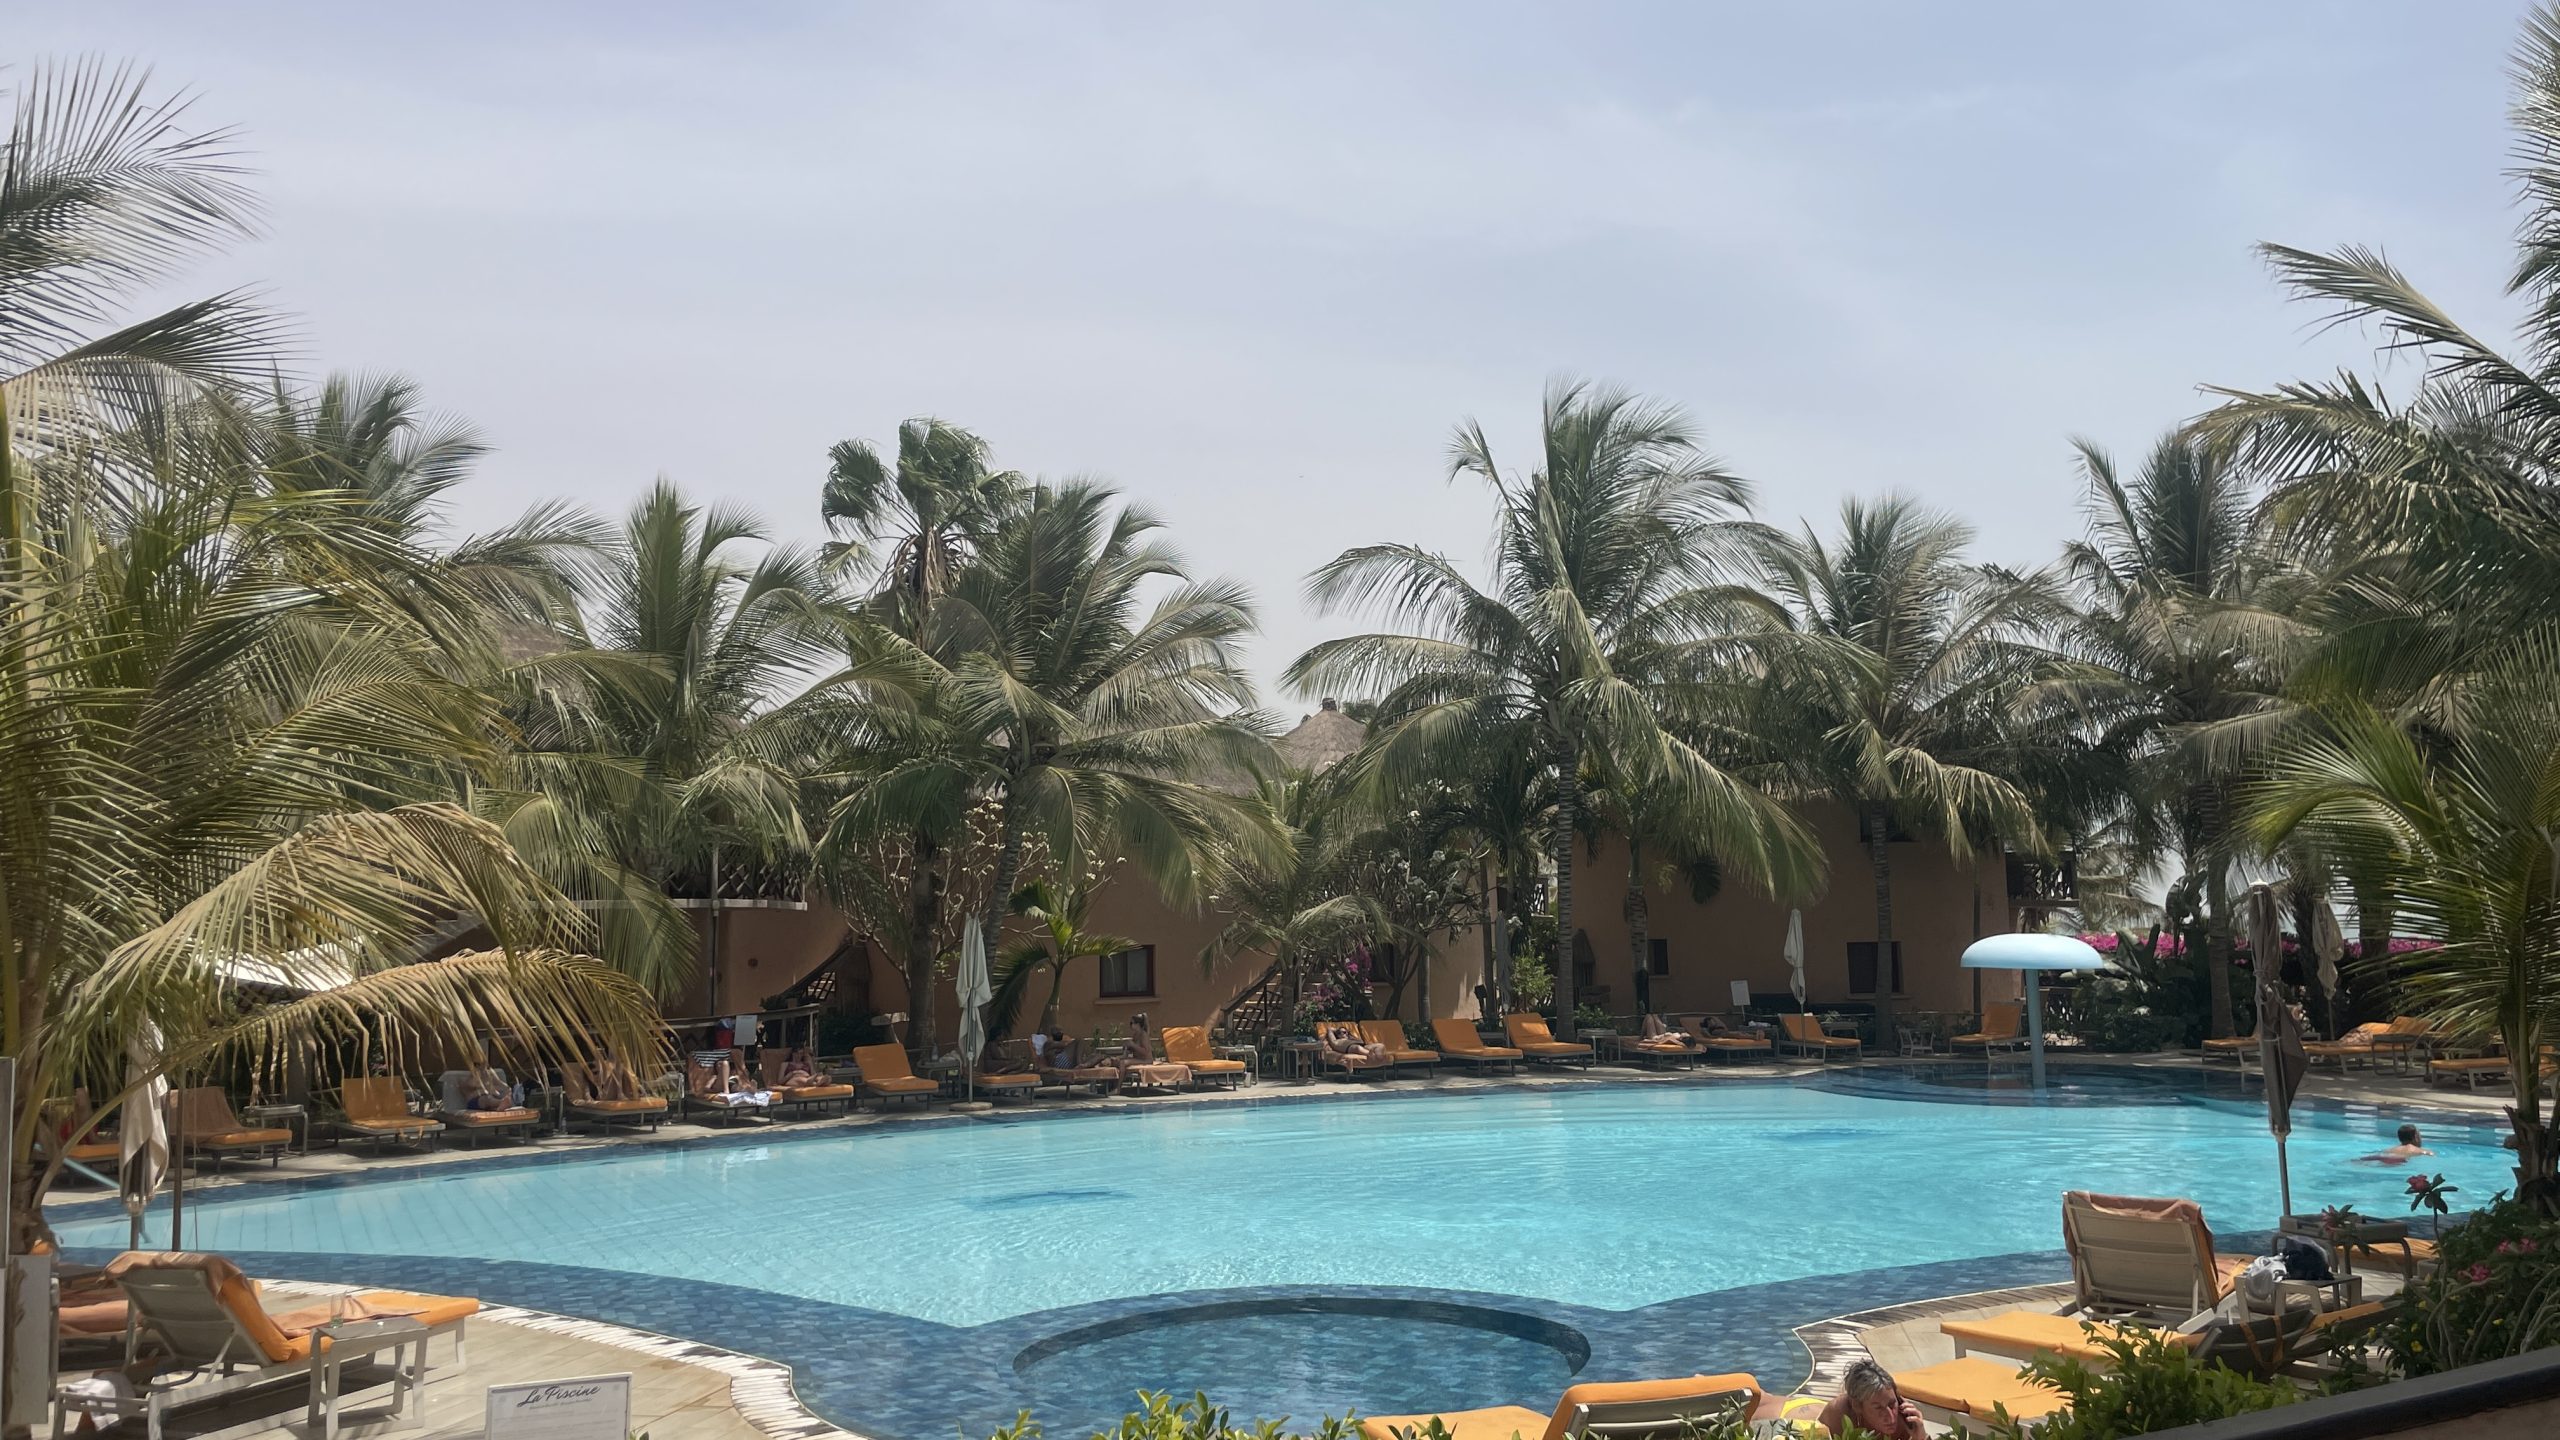 A pool surrounded by palm trees at Le Lamantin hotel in Senegal. The insurance arm of the World Bank, MIGA, used millions of its climate funds in chain hotels, while fishermen struggle with climate impacts.